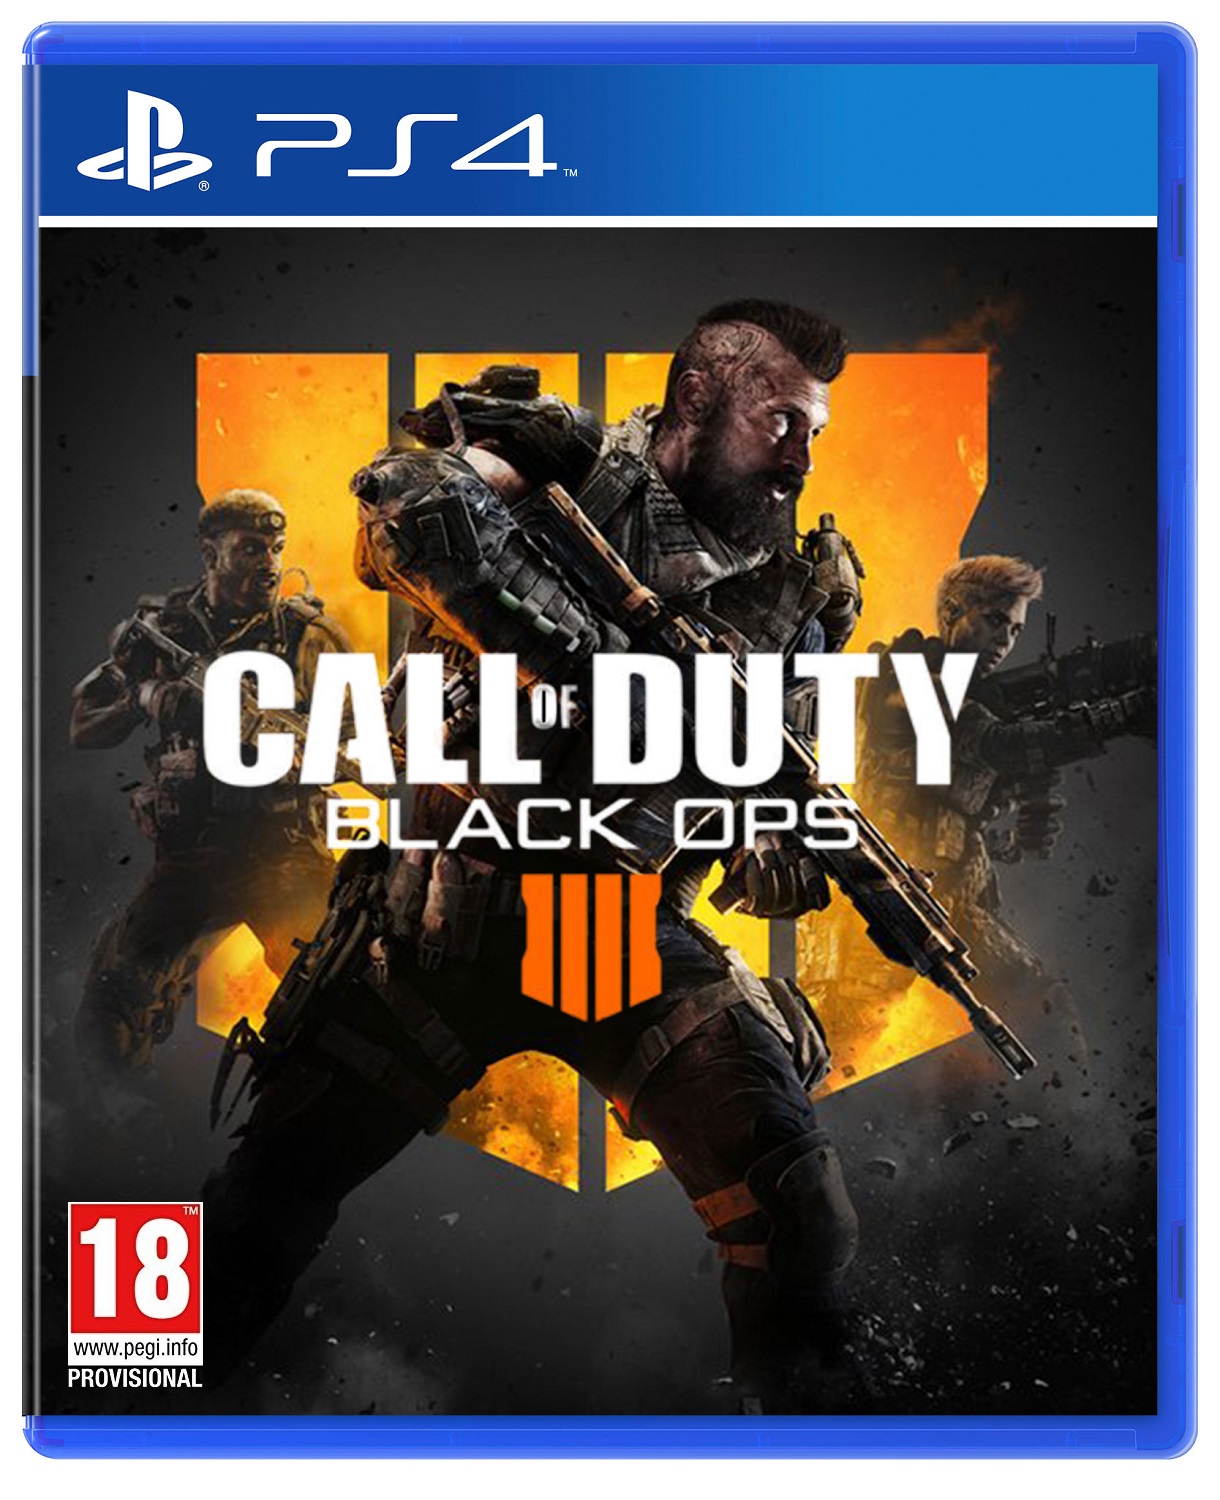 cheap call of duty black ops 4 ps4